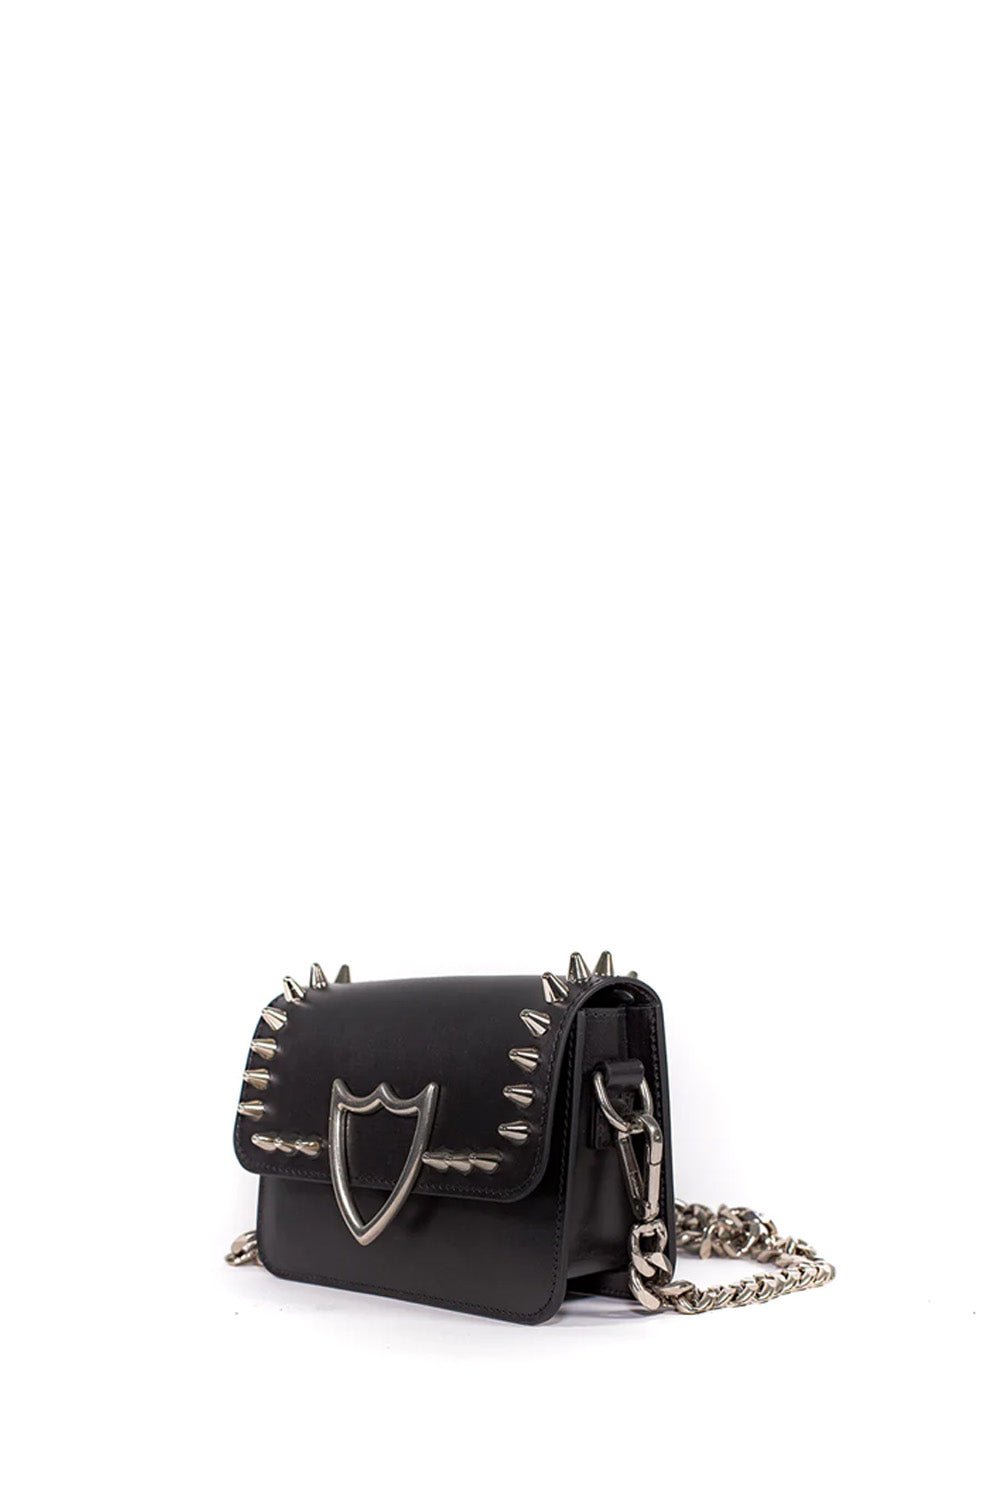 L.A. STUDDED MINI BAG Leather mini bag. Front studded flap with snap button closure. Front silver colored metal logo detail. One internal patch pocket. Leather lining. Shoulder leather strap and metal chain little strap. Made in Italy. 100% Leather. Lengh